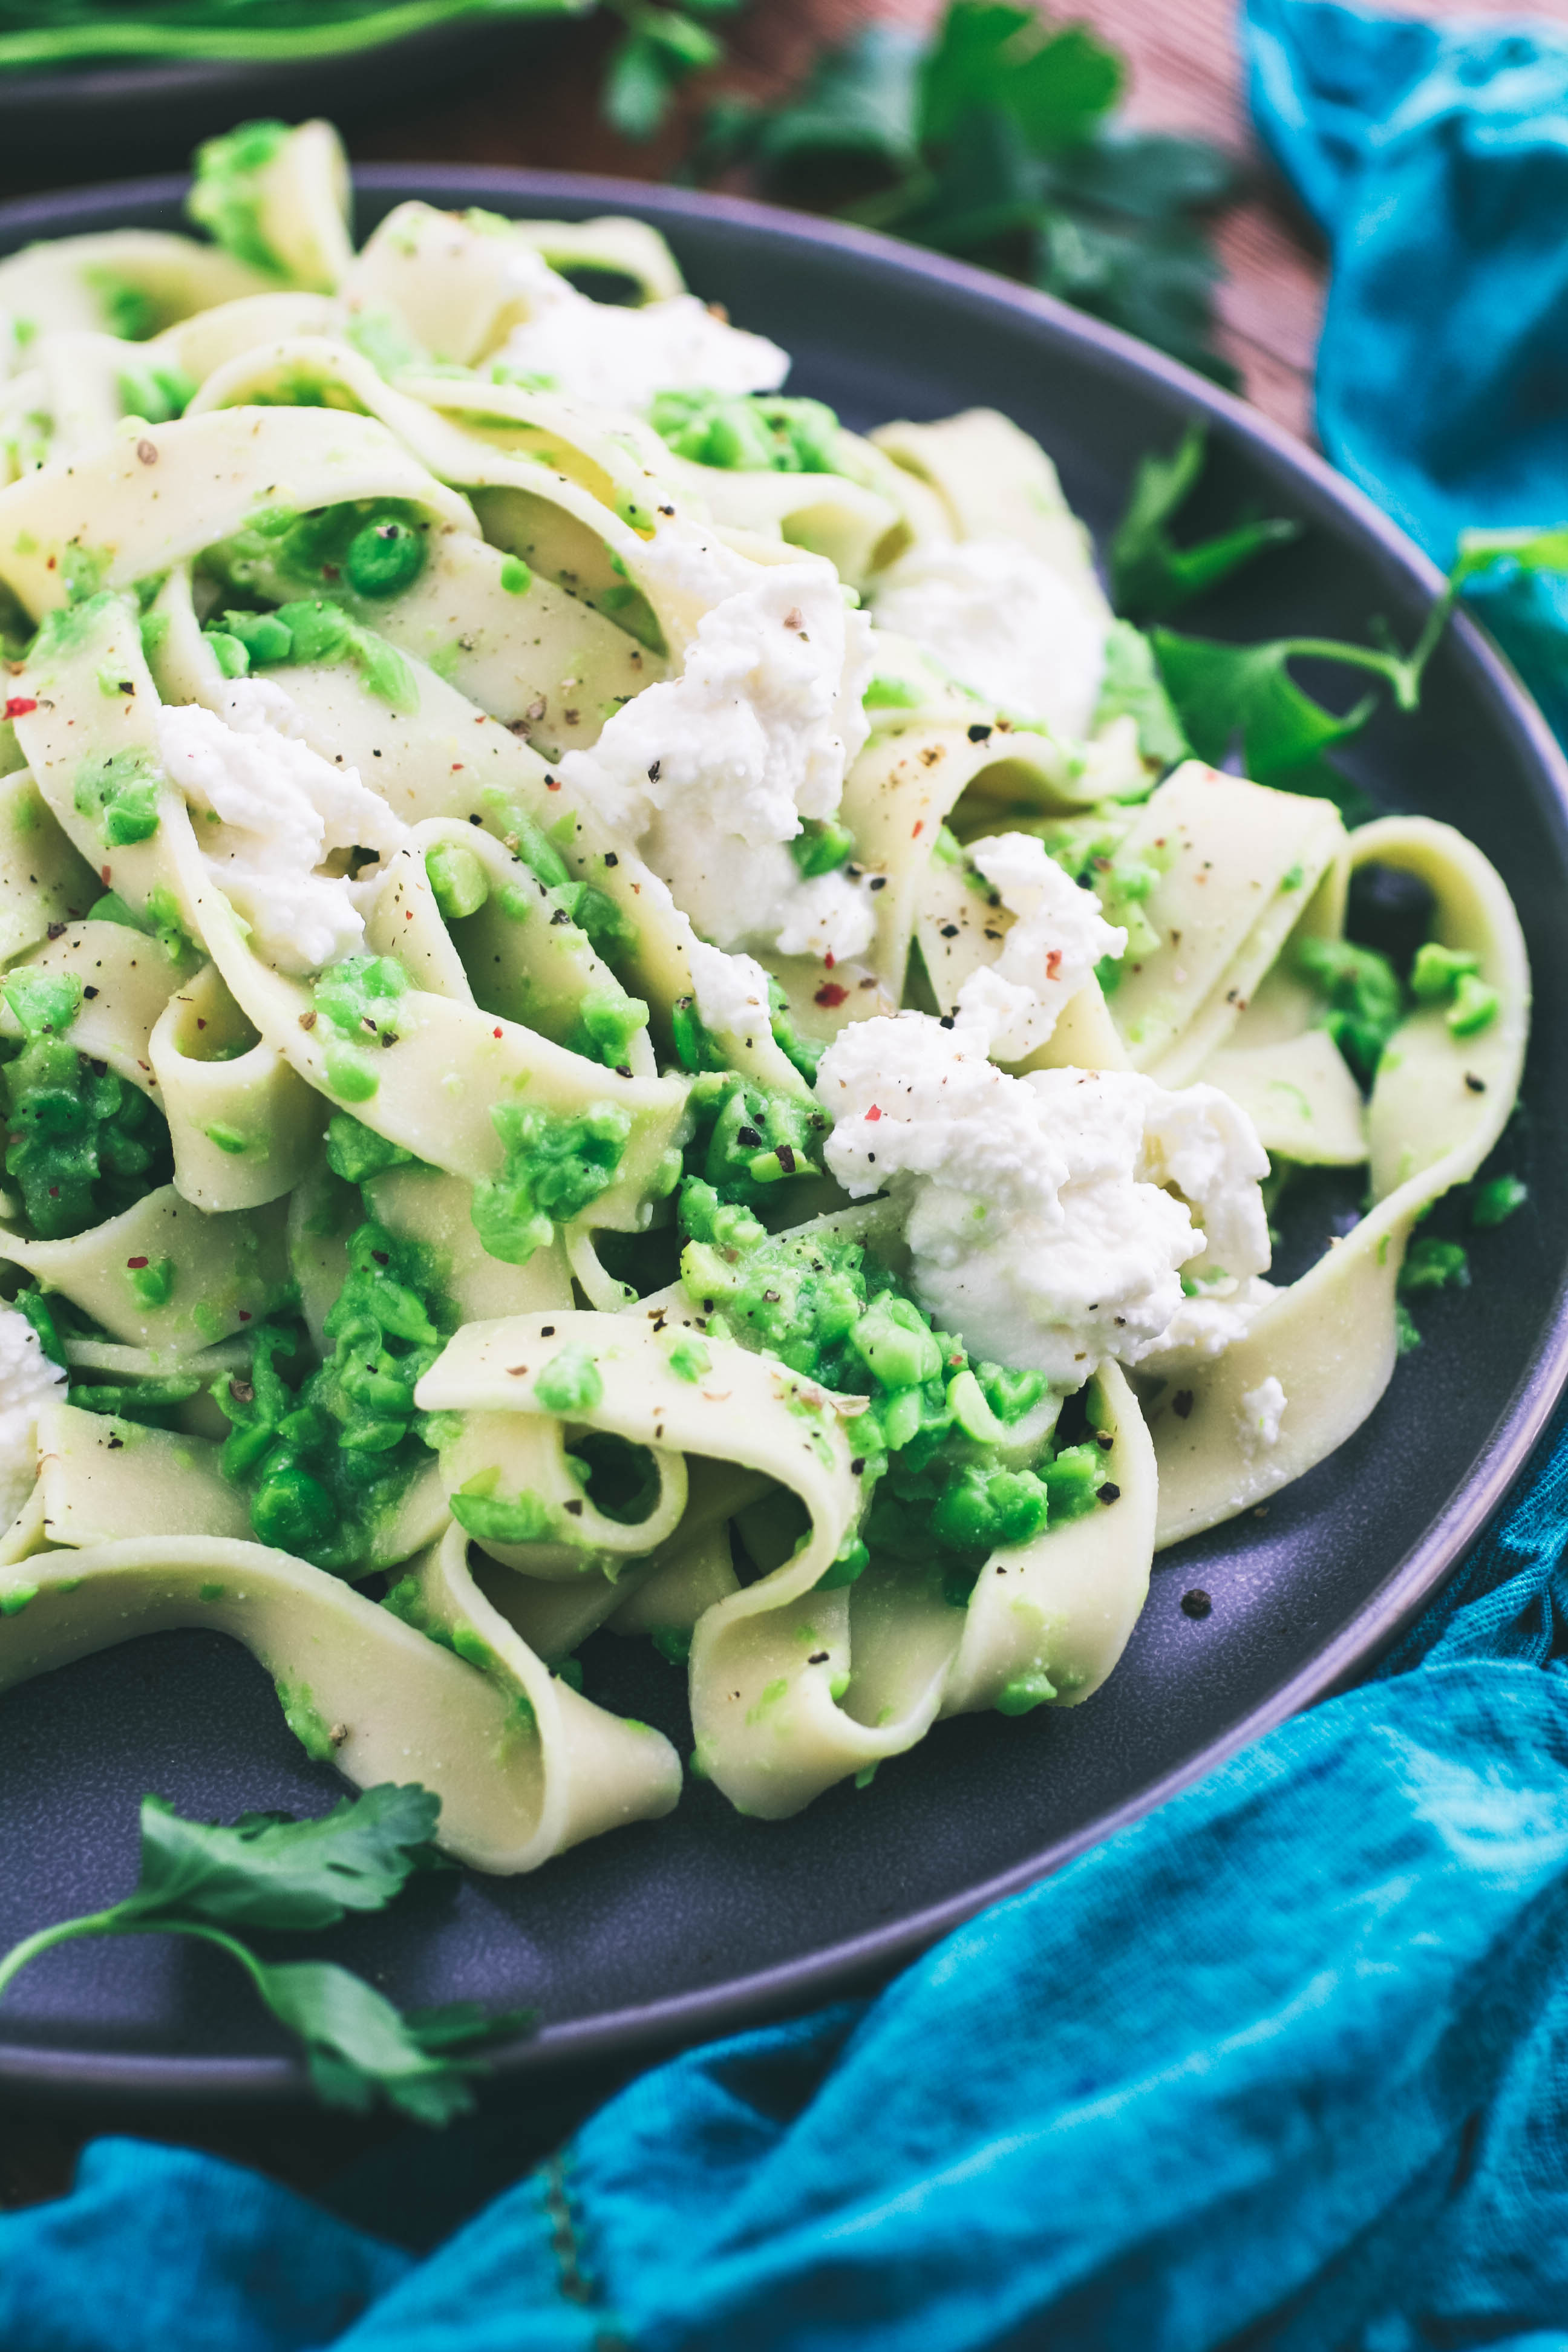 Pasta with Smashed Peas and Ricotta is an easy-to-make dish that is a delight! Pasta with Smashed Peas and Ricotta brings fresh flavor to your table.